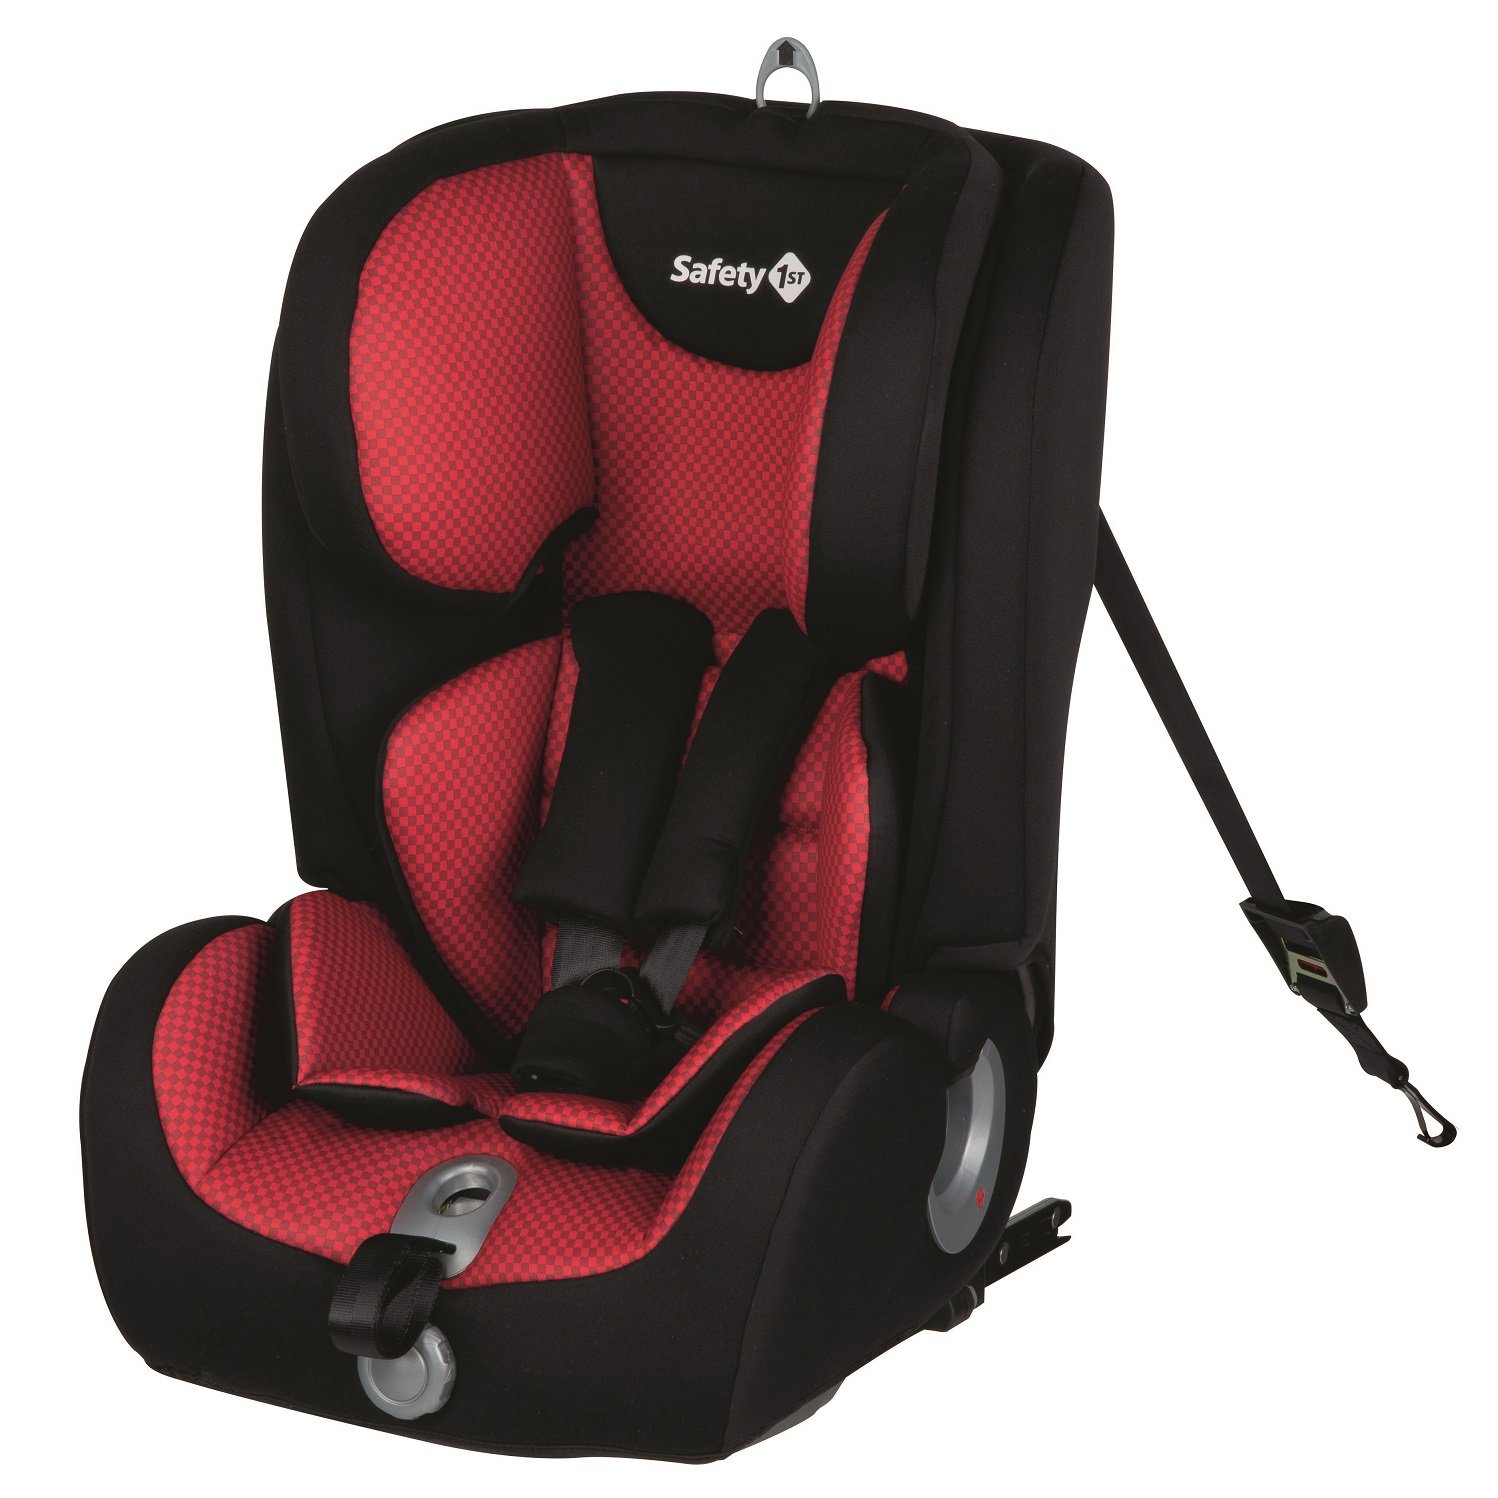 Safety1st - Ever Fix Car Seat (9-36kg) - Pixel Red